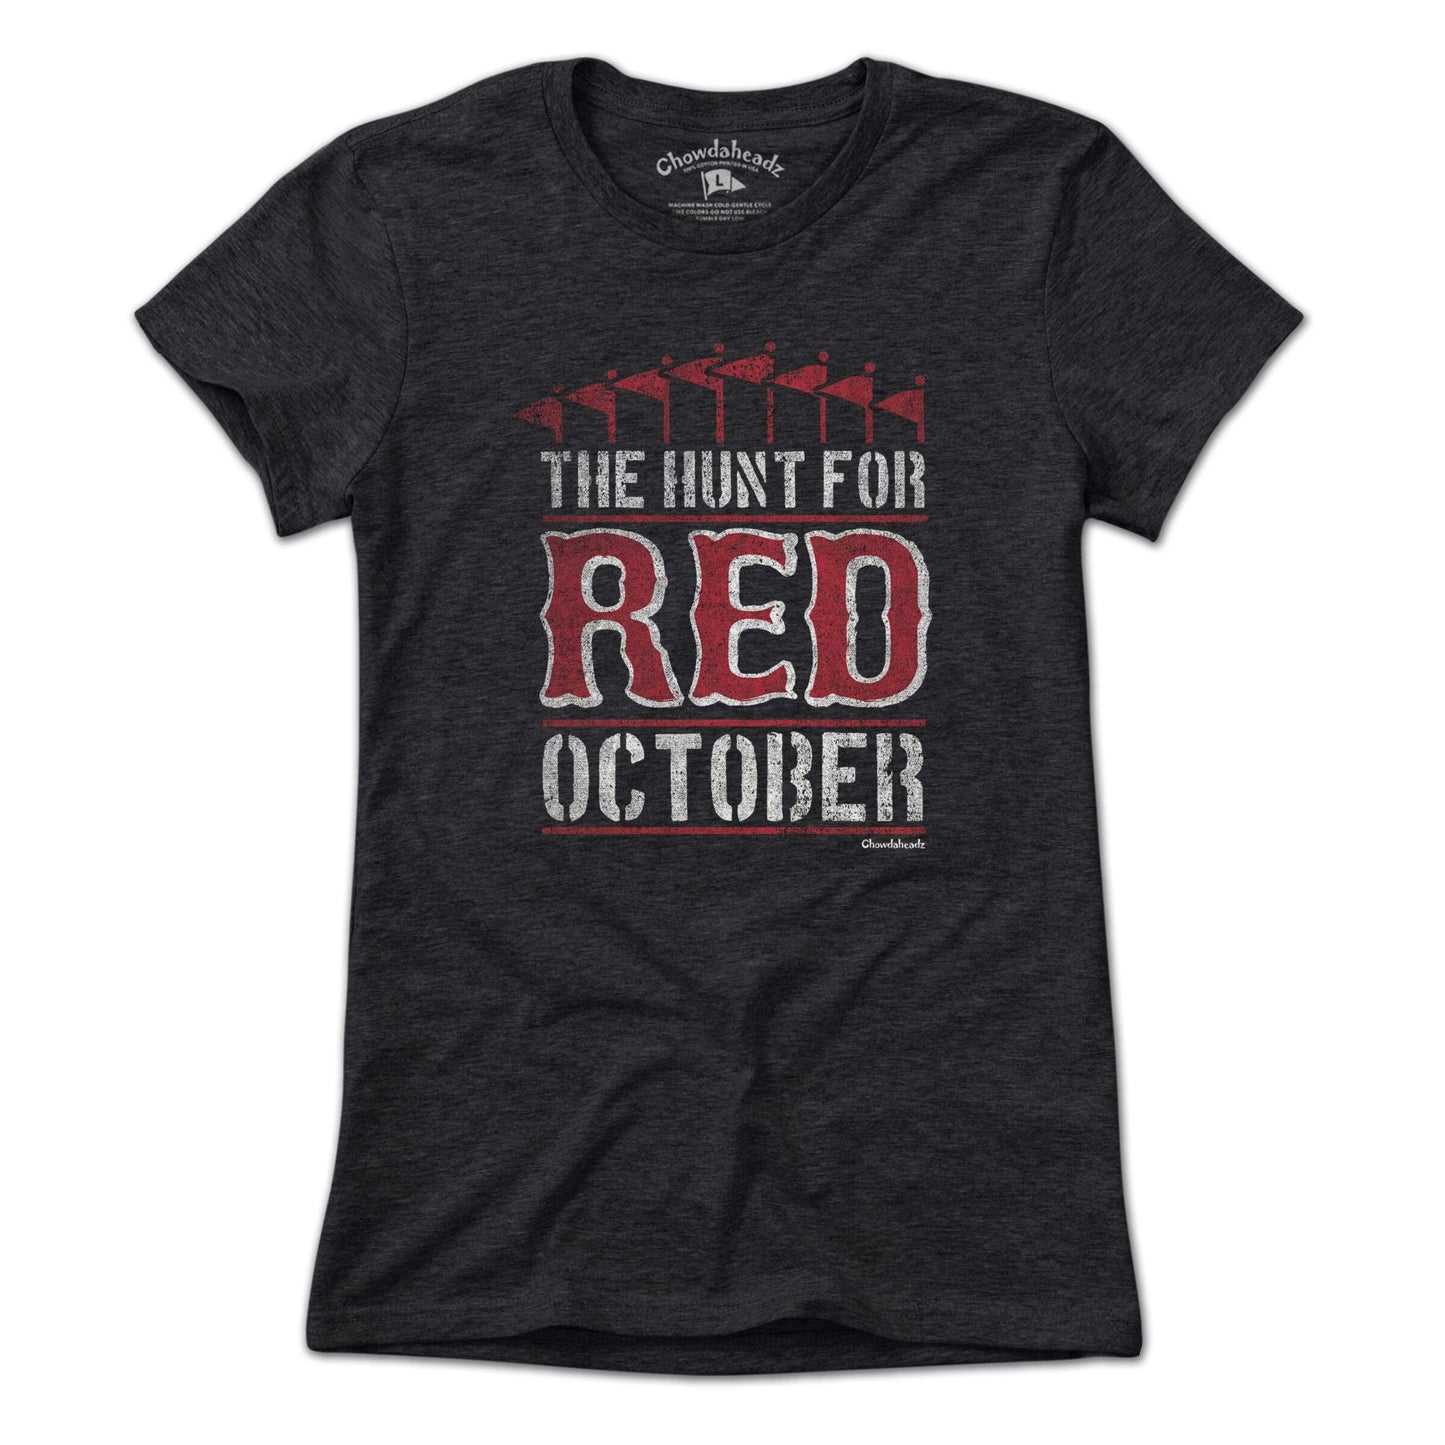 The Hunt for Red October T-Shirt - Chowdaheadz